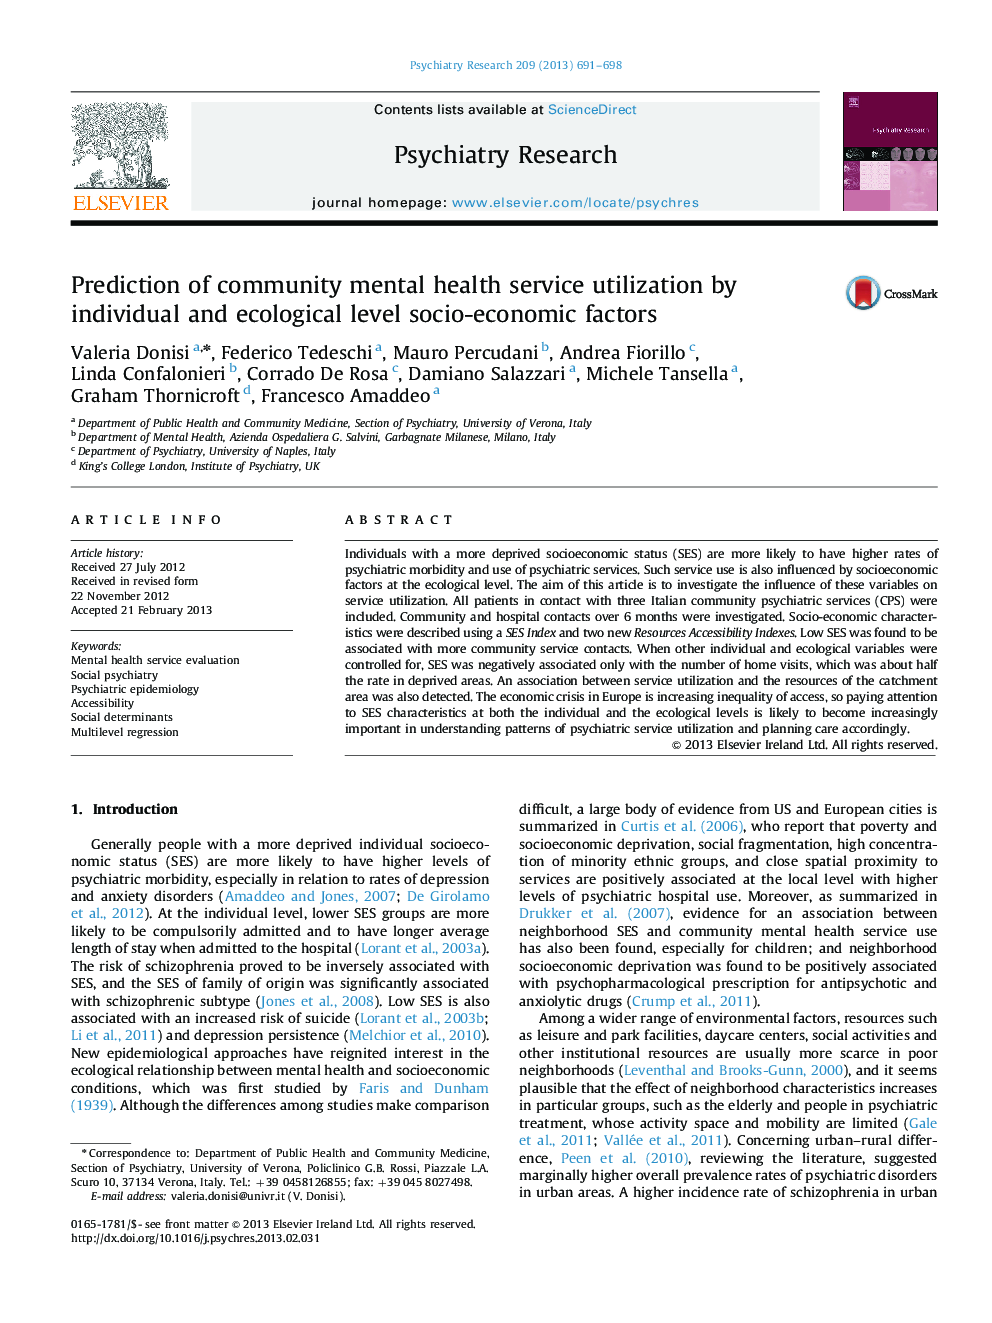 Prediction of community mental health service utilization by individual and ecological level socio-economic factors